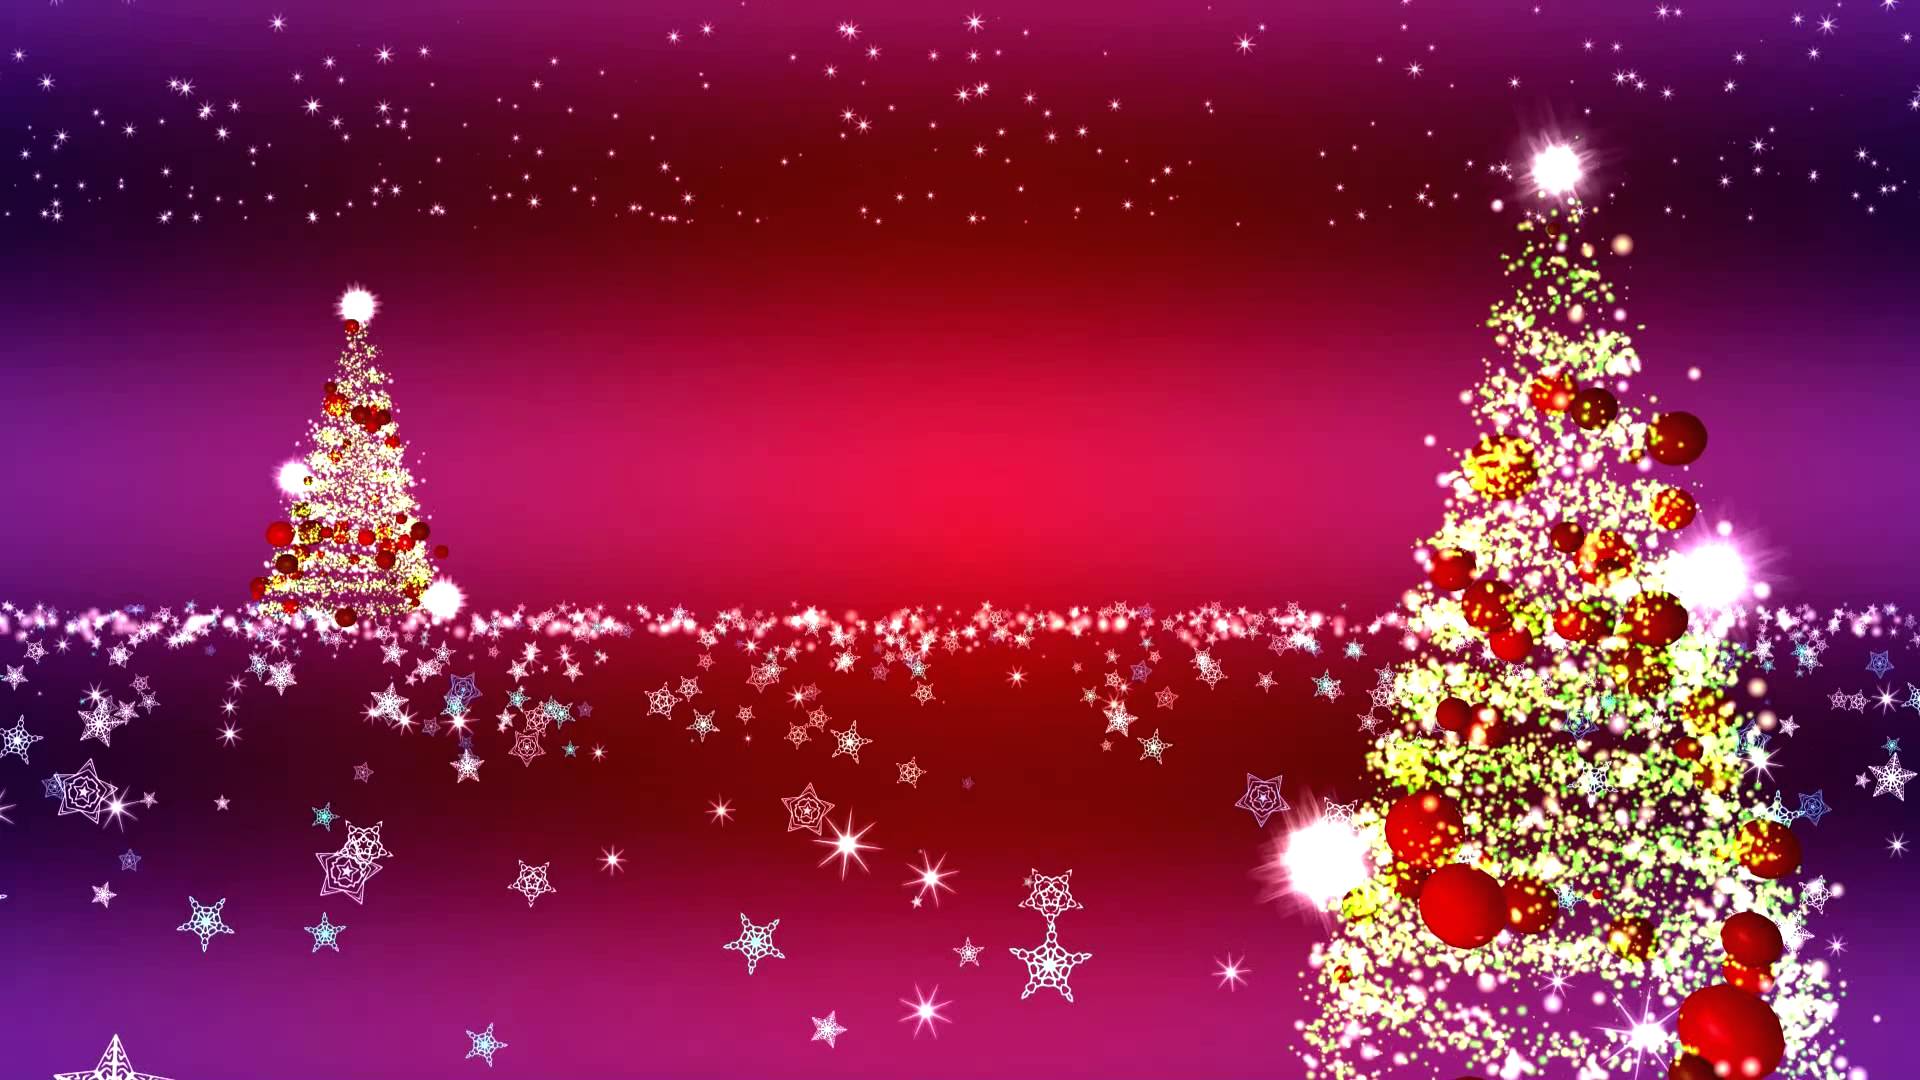 2015 Christmas Hd s Images Photos Pictures   Quality